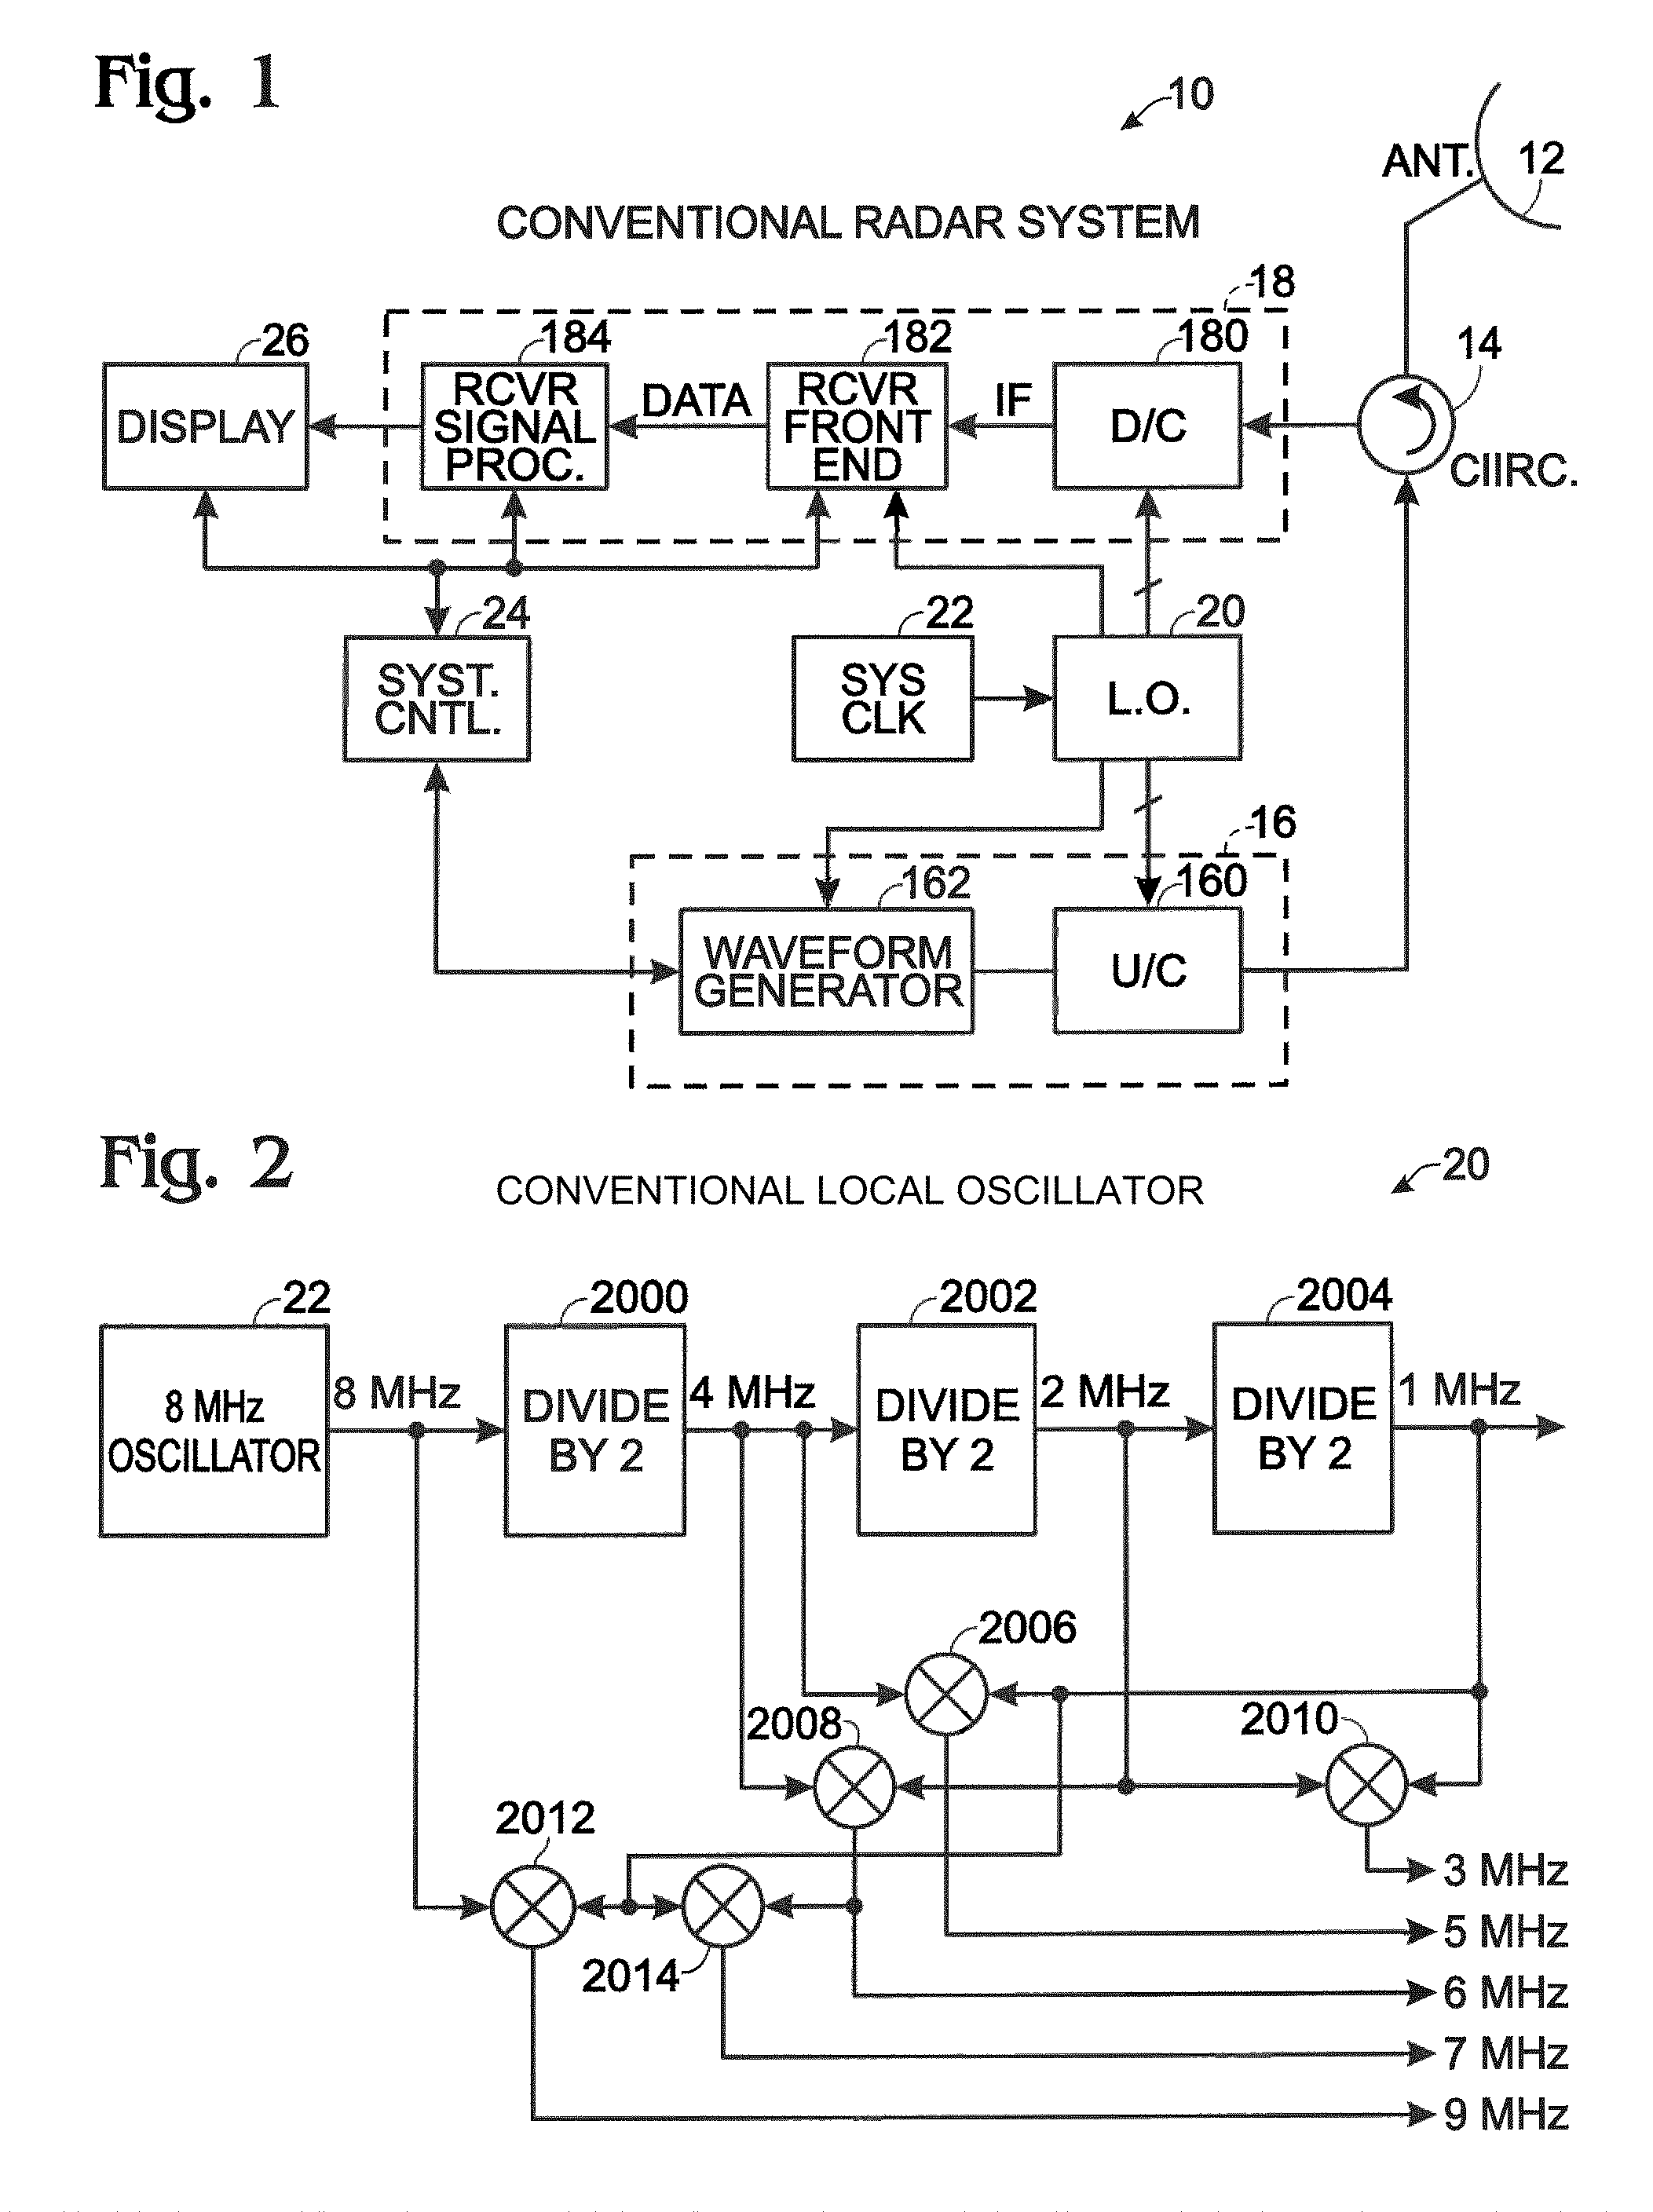 System and method for coherent frequency switching in DDS architectures